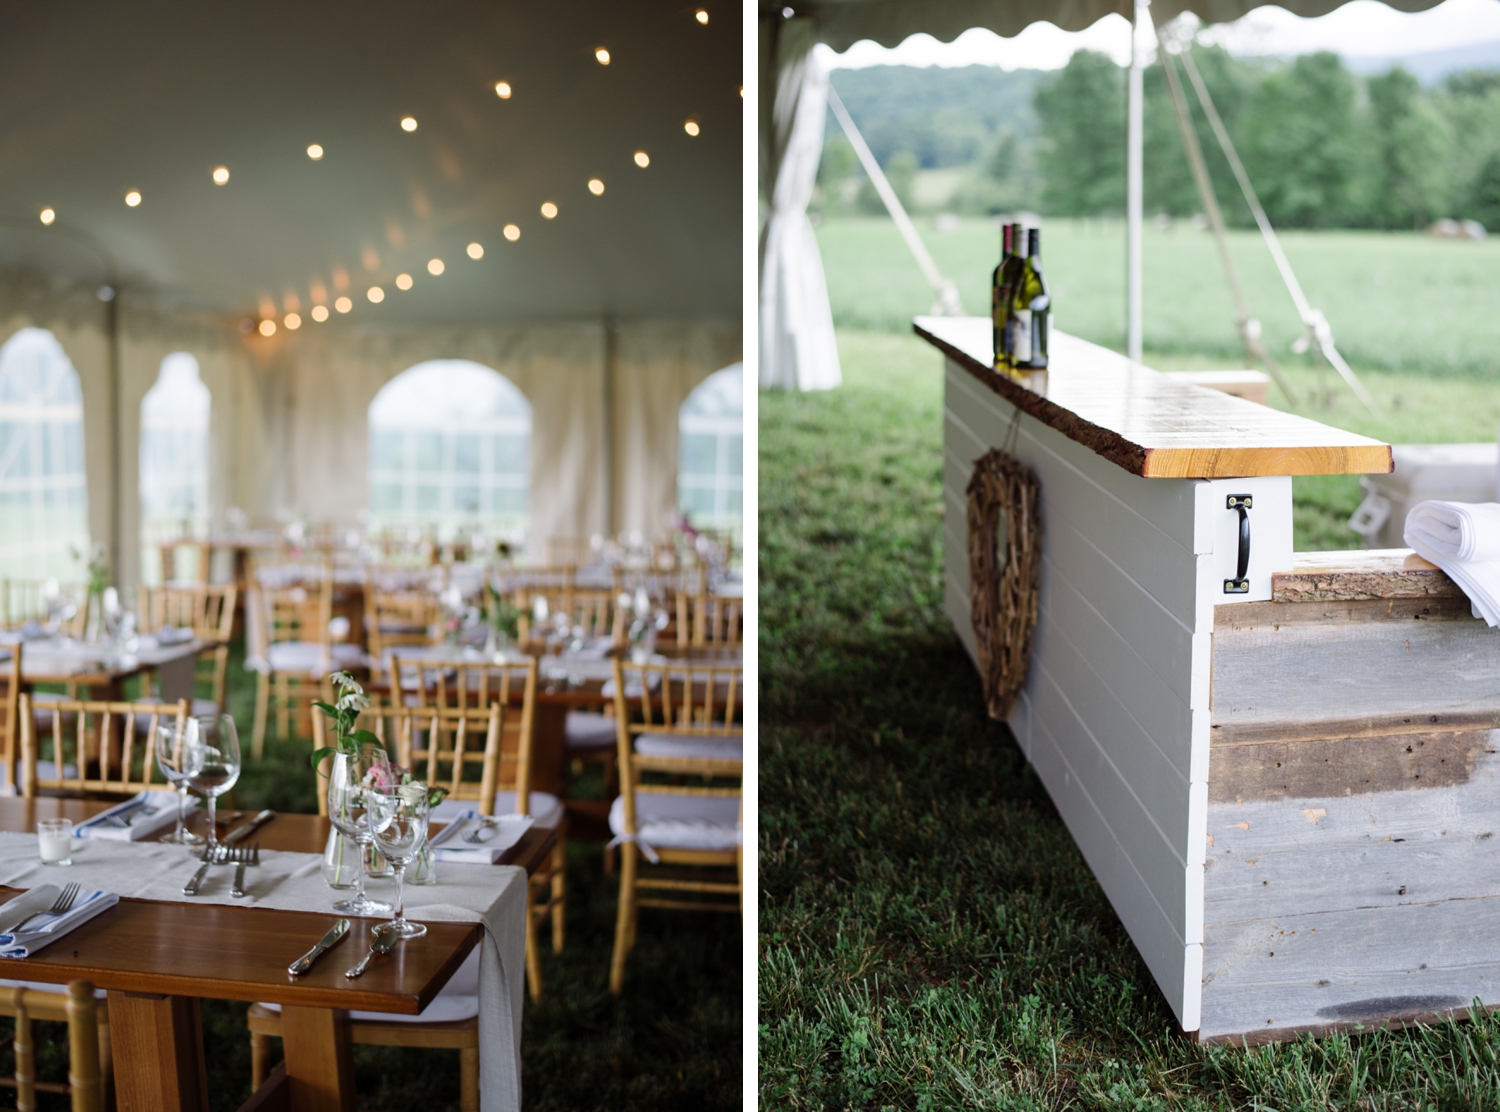 Tented wedding in a private backyard in New Haven, Vermont